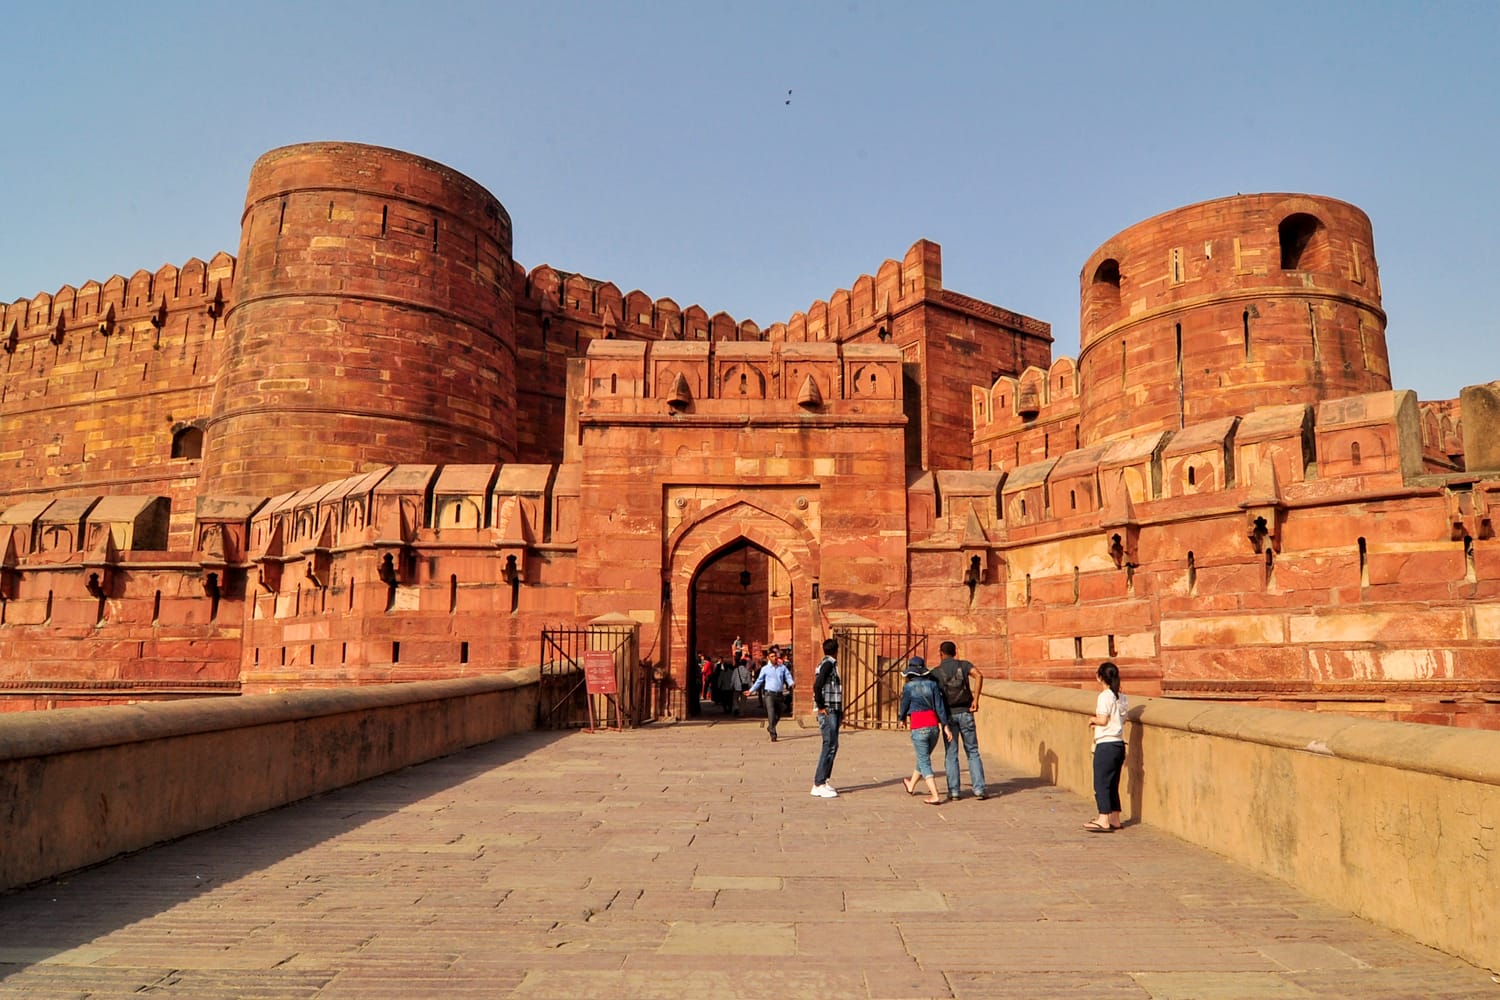 Agra Red Fort, a Unesco World Heritage site, and one of the biggest tourist highlights, just 2 km of Taj Mahal. Built by several Mughal emperors from XV to XVI centuries. Uttar Pradesh, India.